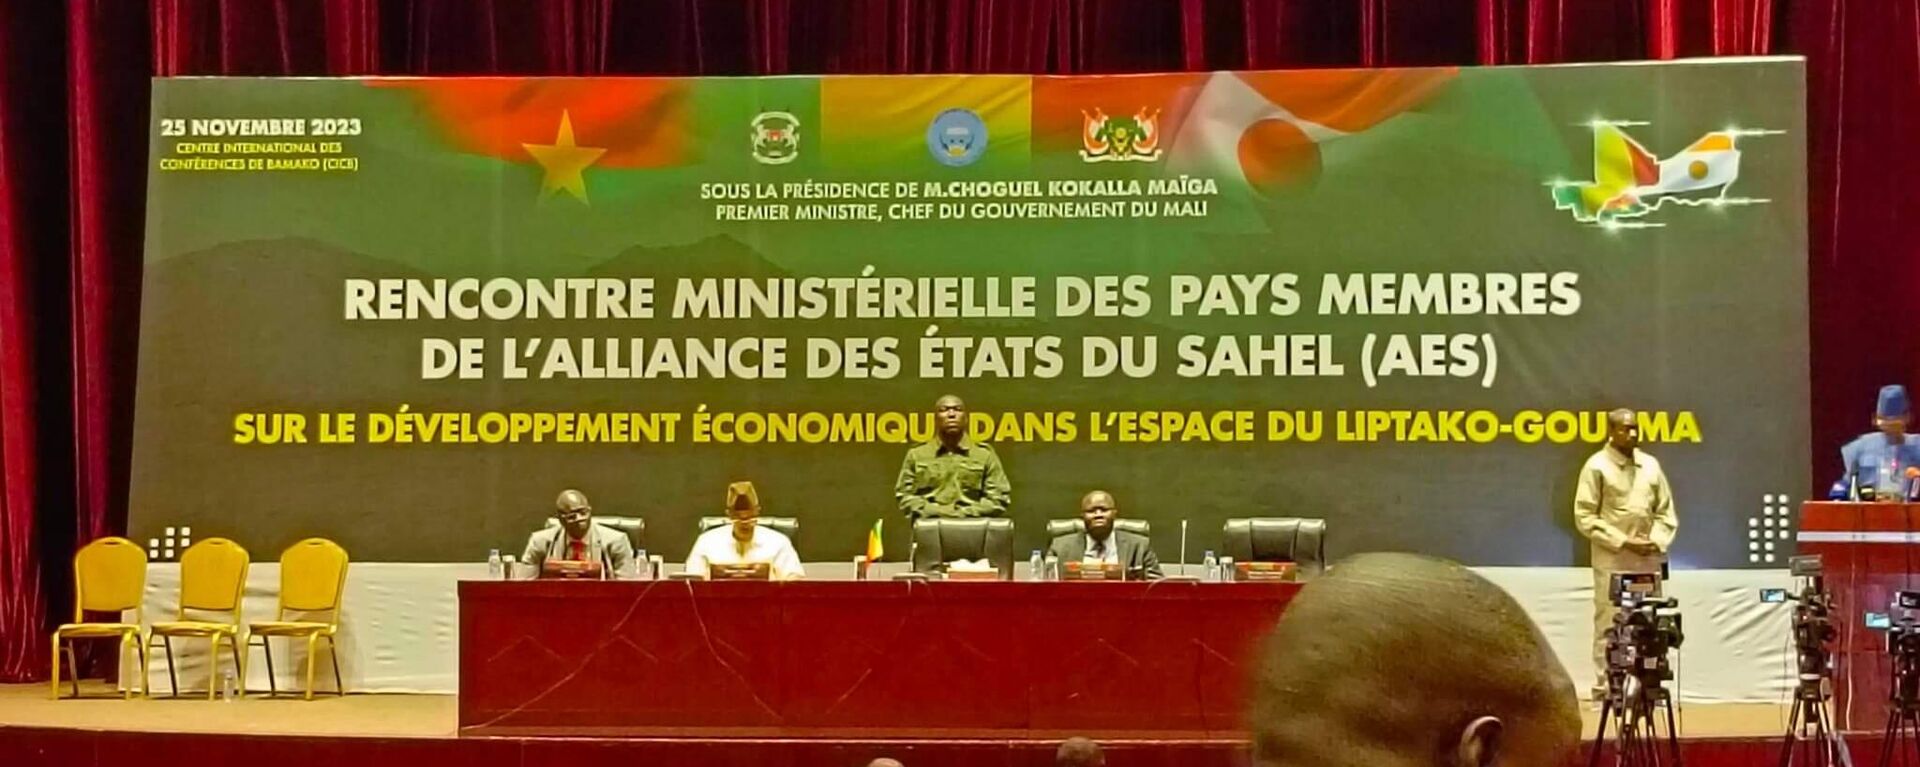 On November 25, the Malian capital Bamako hosted the meeting of the economy and trade ministers from Burkina Faso, Mali and Niger - Sputnik Africa, 1920, 26.11.2023